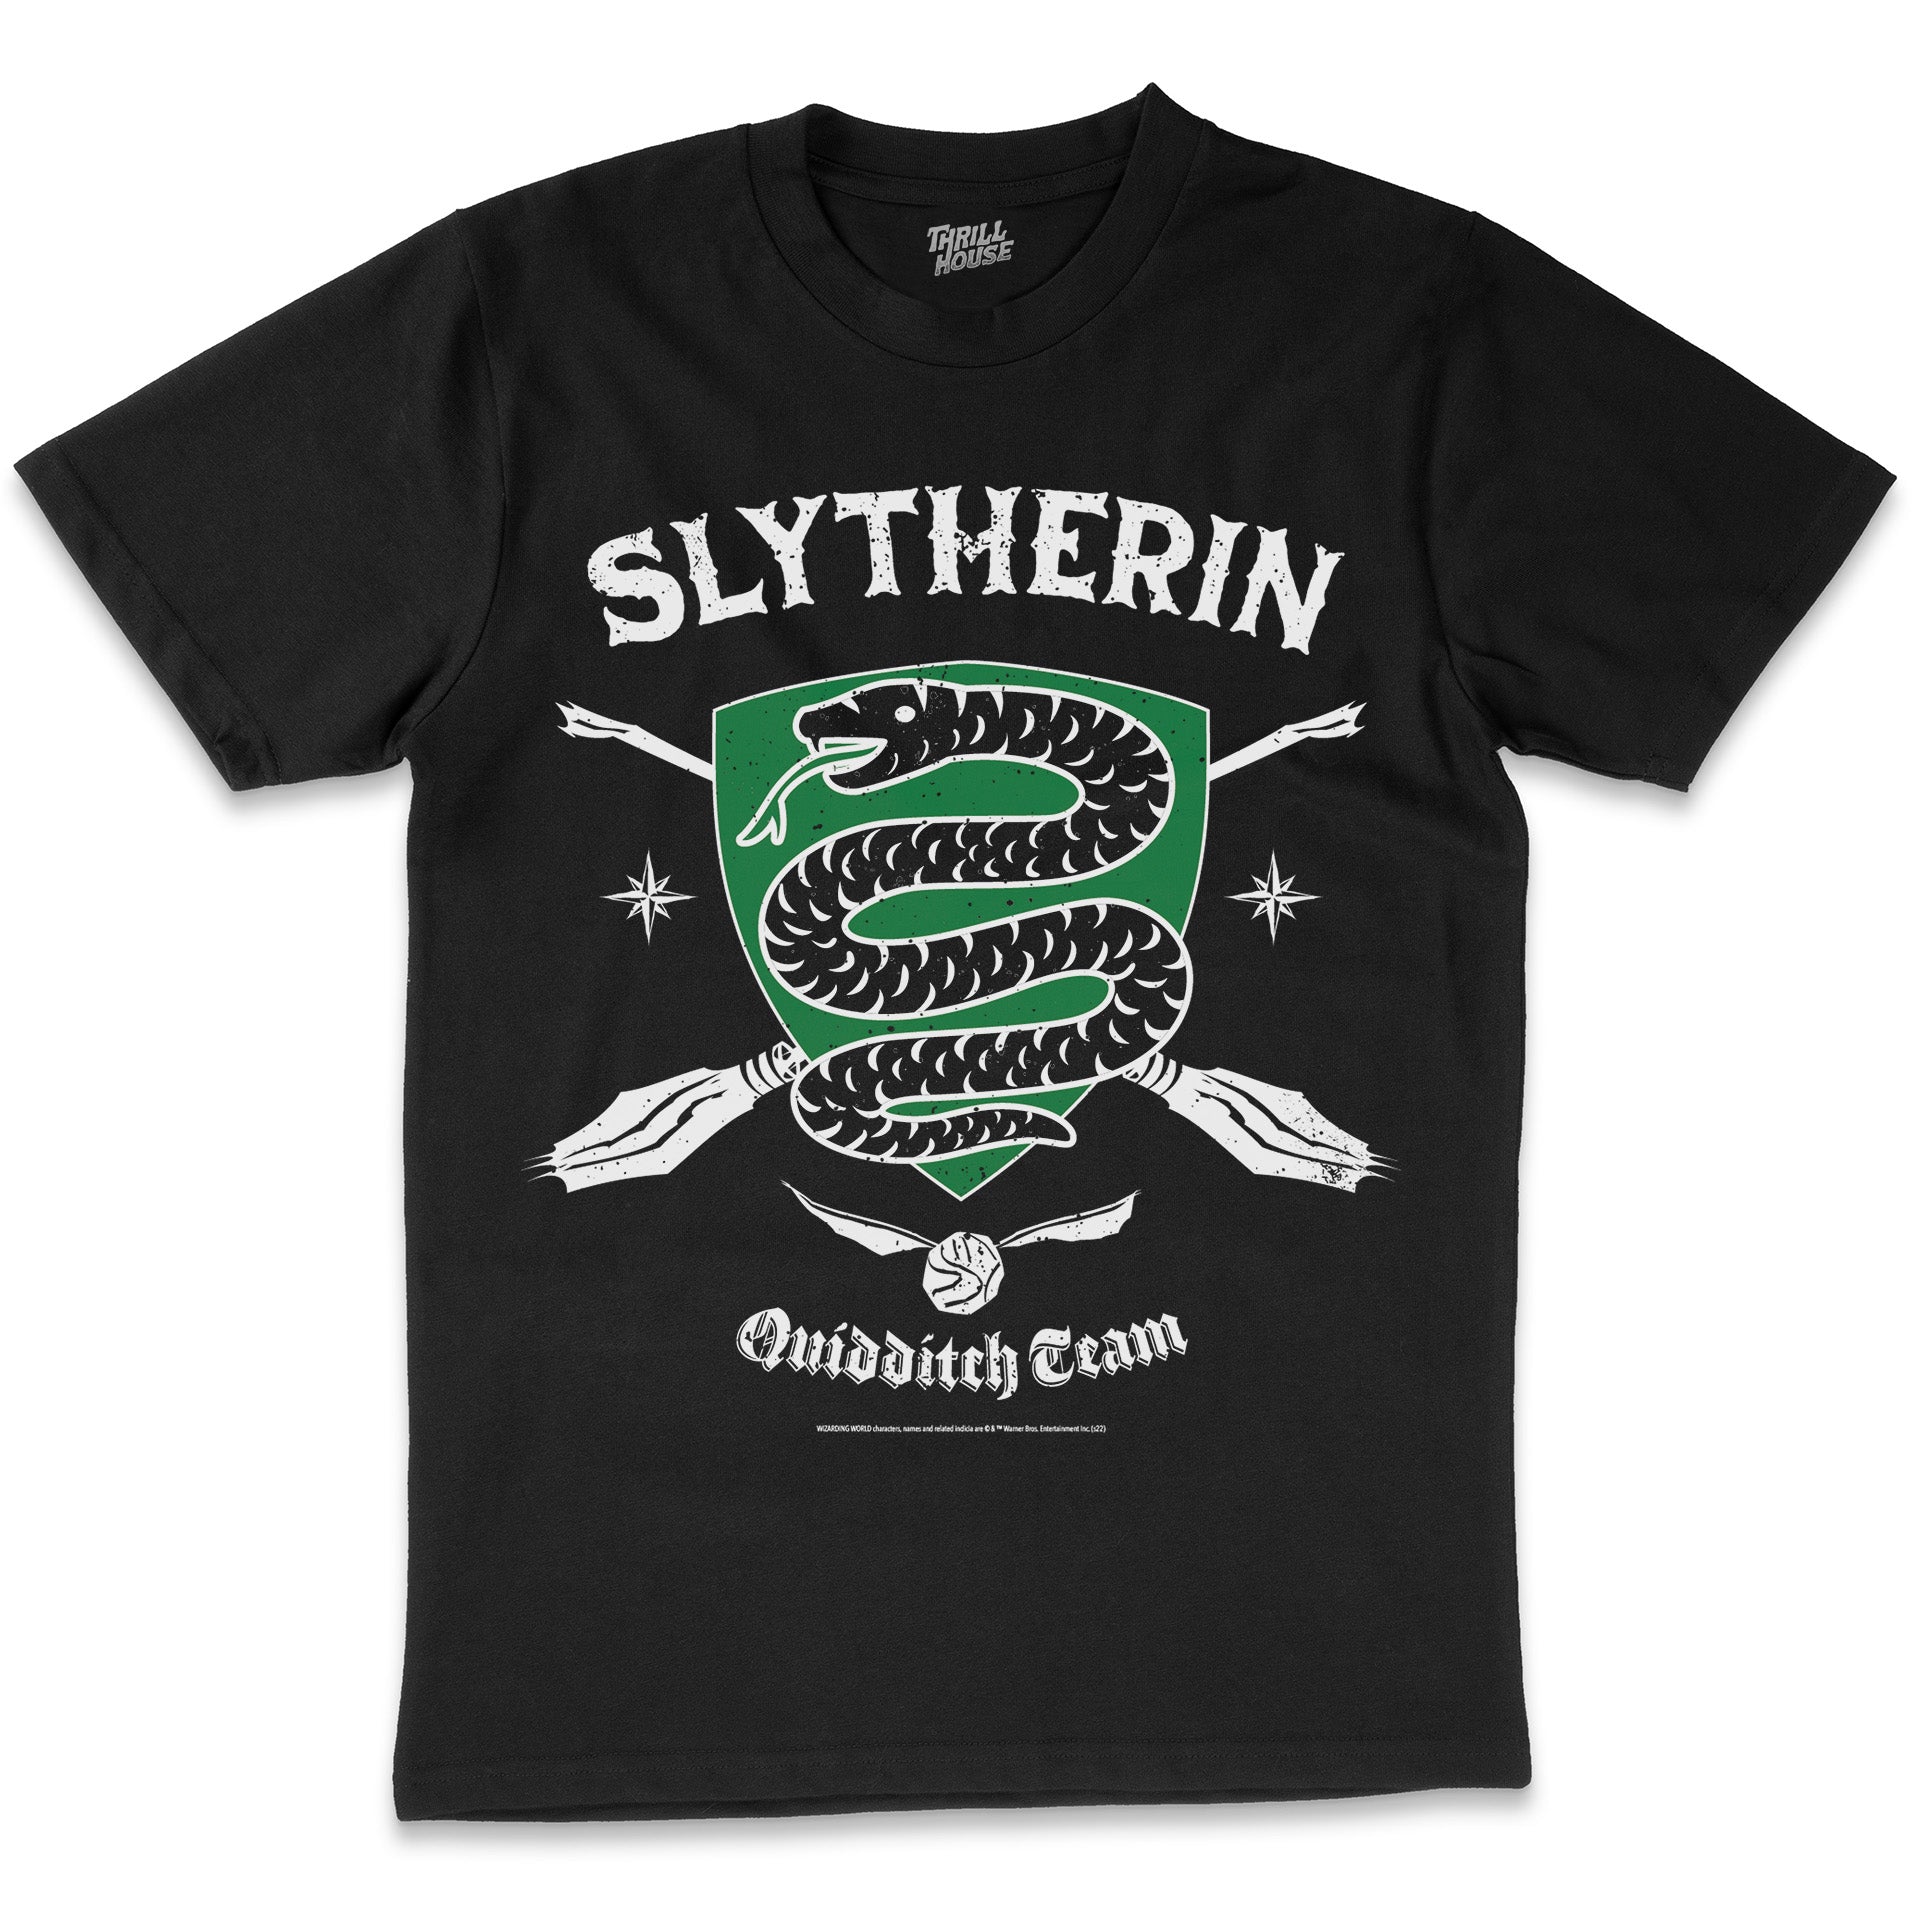 Harry Potter Slytherin Quidditch Team Hogwarts Witchcraft Wizardry School Officially Licensed Cotton T-Shirt